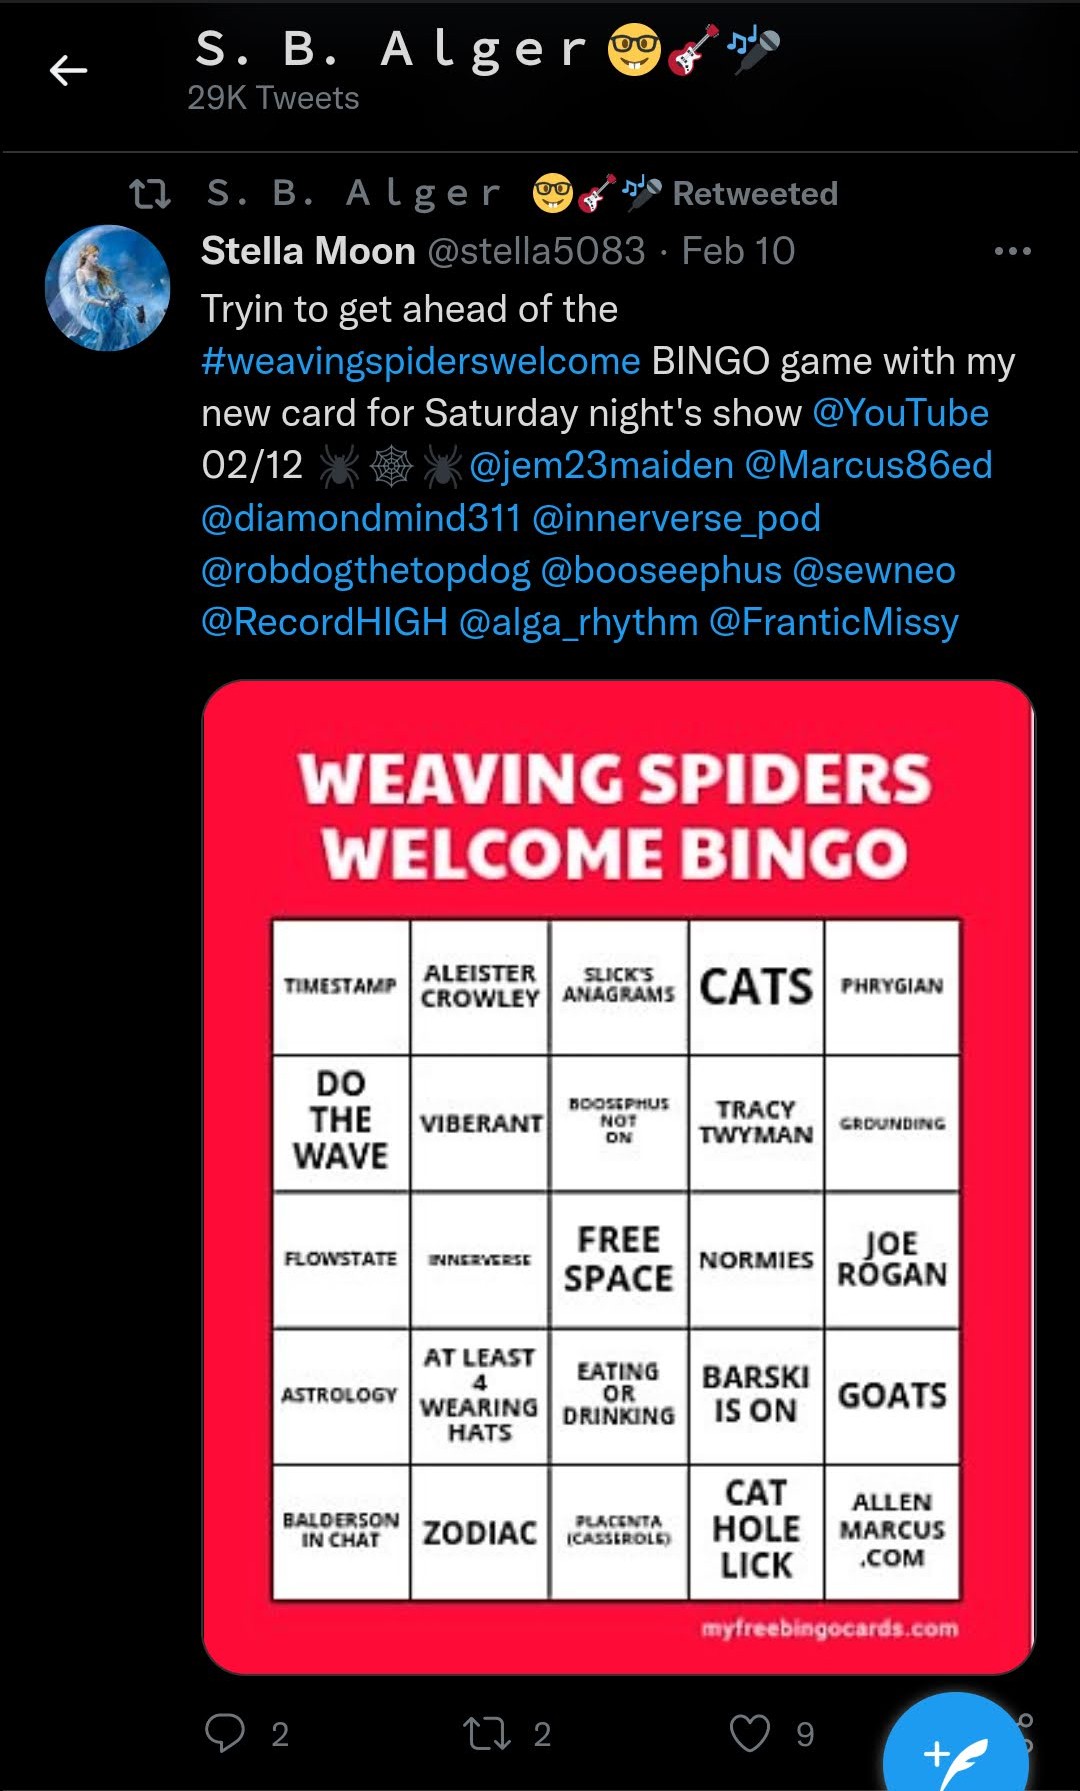 From Twitter: Bingo: S. B. Alger 29K Tweets S. B. Alger Retweeted Stella Moon @stella5083. Feb 10 Tryin to get ahead of the #weavingspiderswelcome BINGO game with my new card for Saturday night's show @YouTube 02/12@jem23maiden @Marcus86ed @diamondmind311 @innerverse_pod @robdogthetopdog @booseephus @sewneo @RecordHIGH @alga_rhythm @Frantic Missy WEAVING SPIDERS WELCOME BINGO TIMESTAMP - ALEISTER CROWLEY - SLICK'S ANAGRAMS - CATS - PHRYGIAN - DO THE WAVE - VIBERANT - BOOSEPHUS NOT ON - GROUNDING - TRACY TWYMAN - FLOWSTATE - INNERVERSE - NORMIE - SFREE SPACE - JOE RÓGAN - AT LEAST 4 WEARING HATS - EATING OR DRINKING - ASTROLOGY - BALDERSON IN CHAT - BARSKI IS ON - GOATS - CAT HOLE LICK - ZODIAC - PLACENTA (CASSEROLE) - ALLEN MARCUS.COM myfreebingocards.com